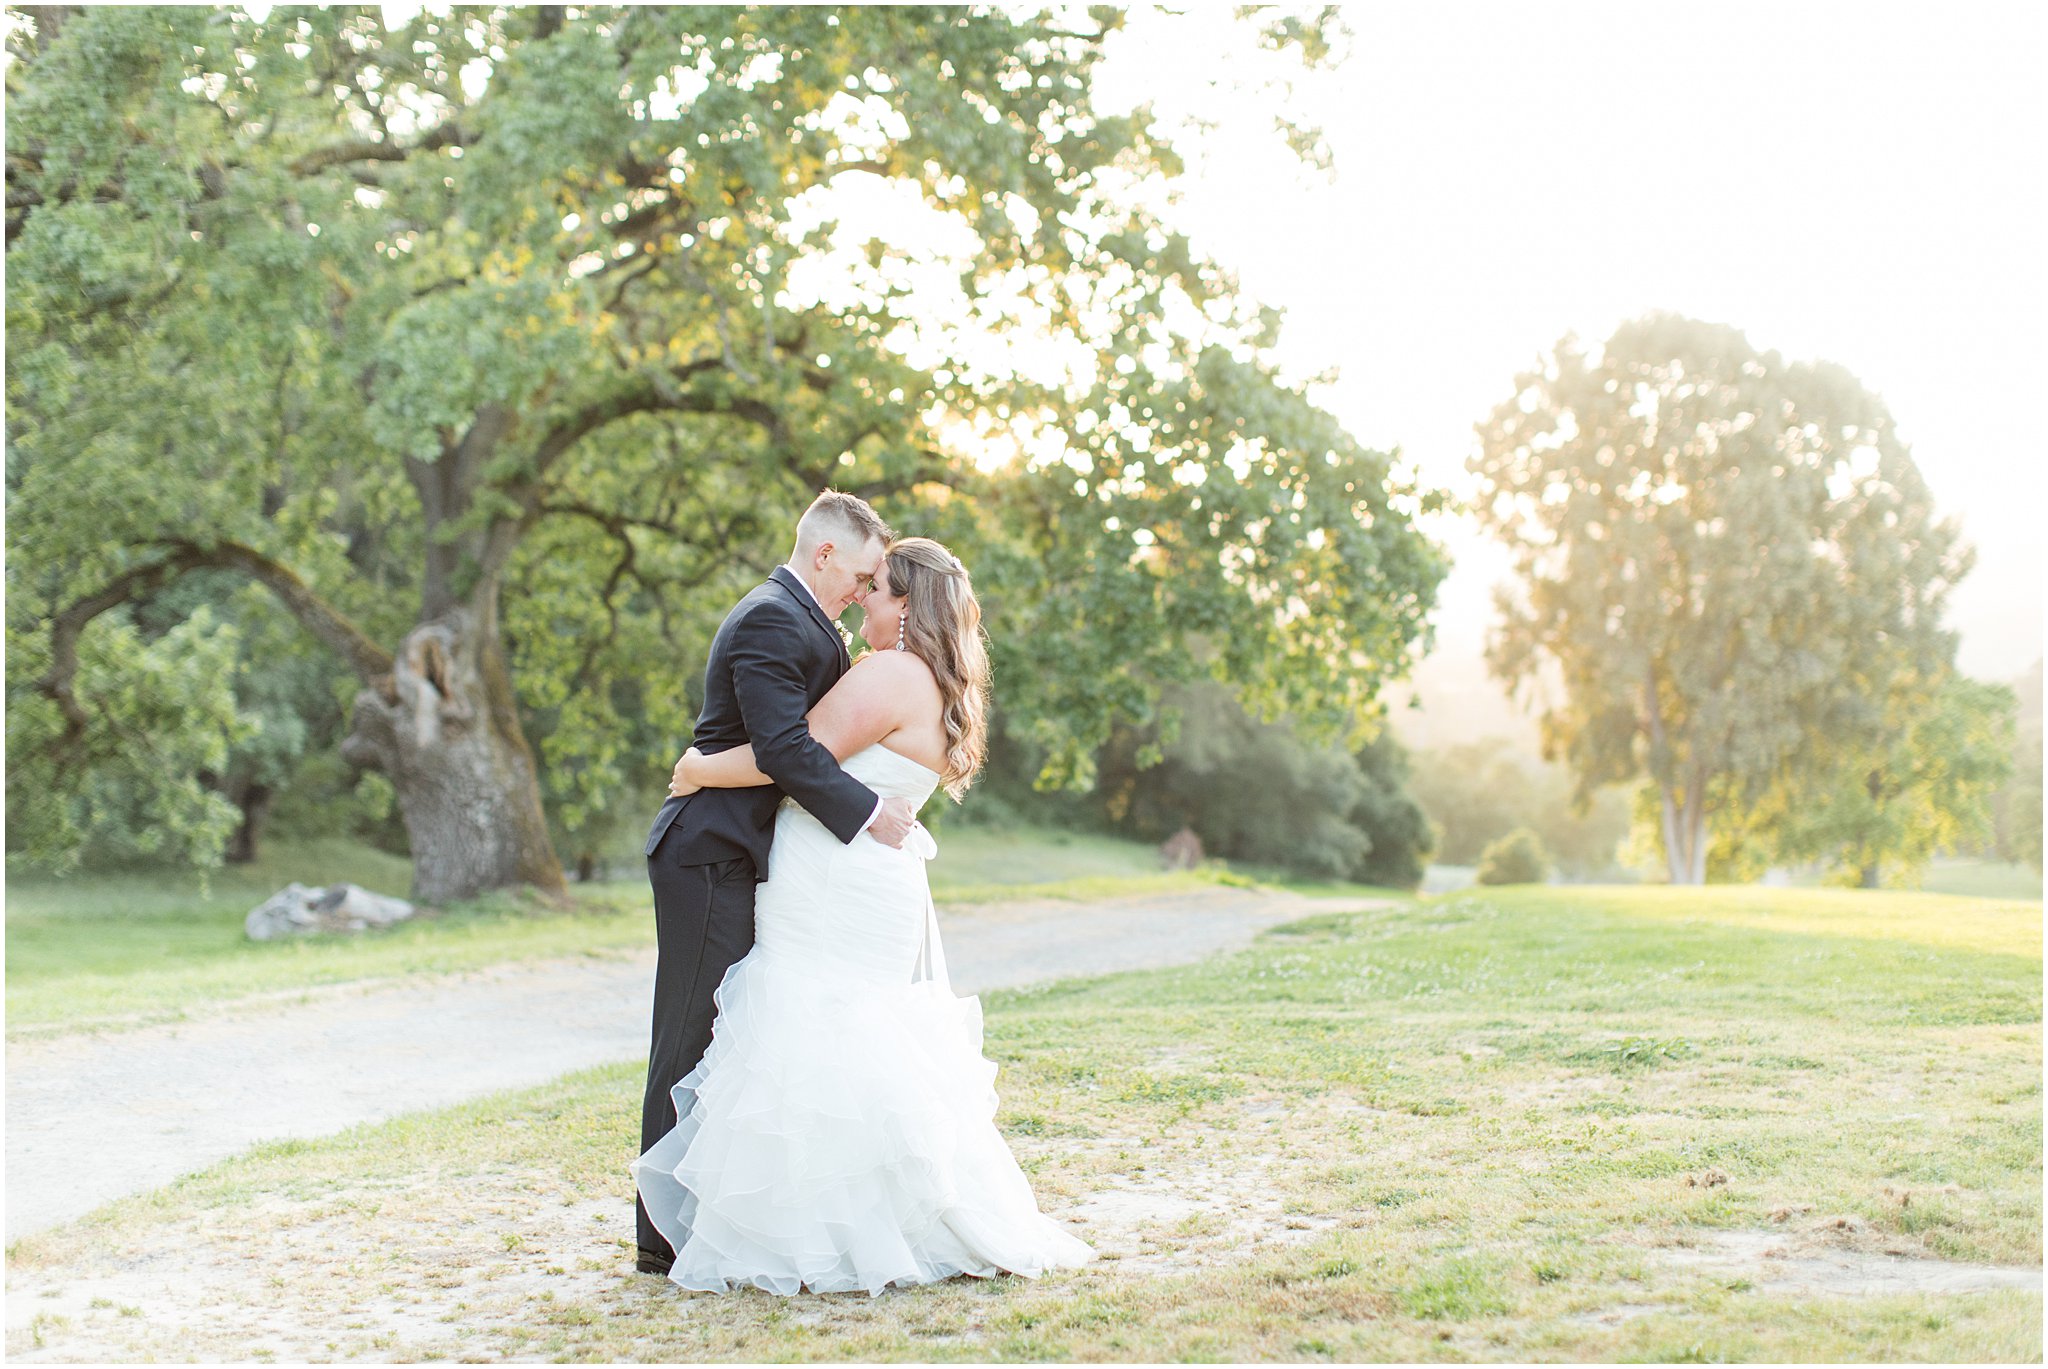 Bride and Groom embrace during golden hour on beautiful golf course